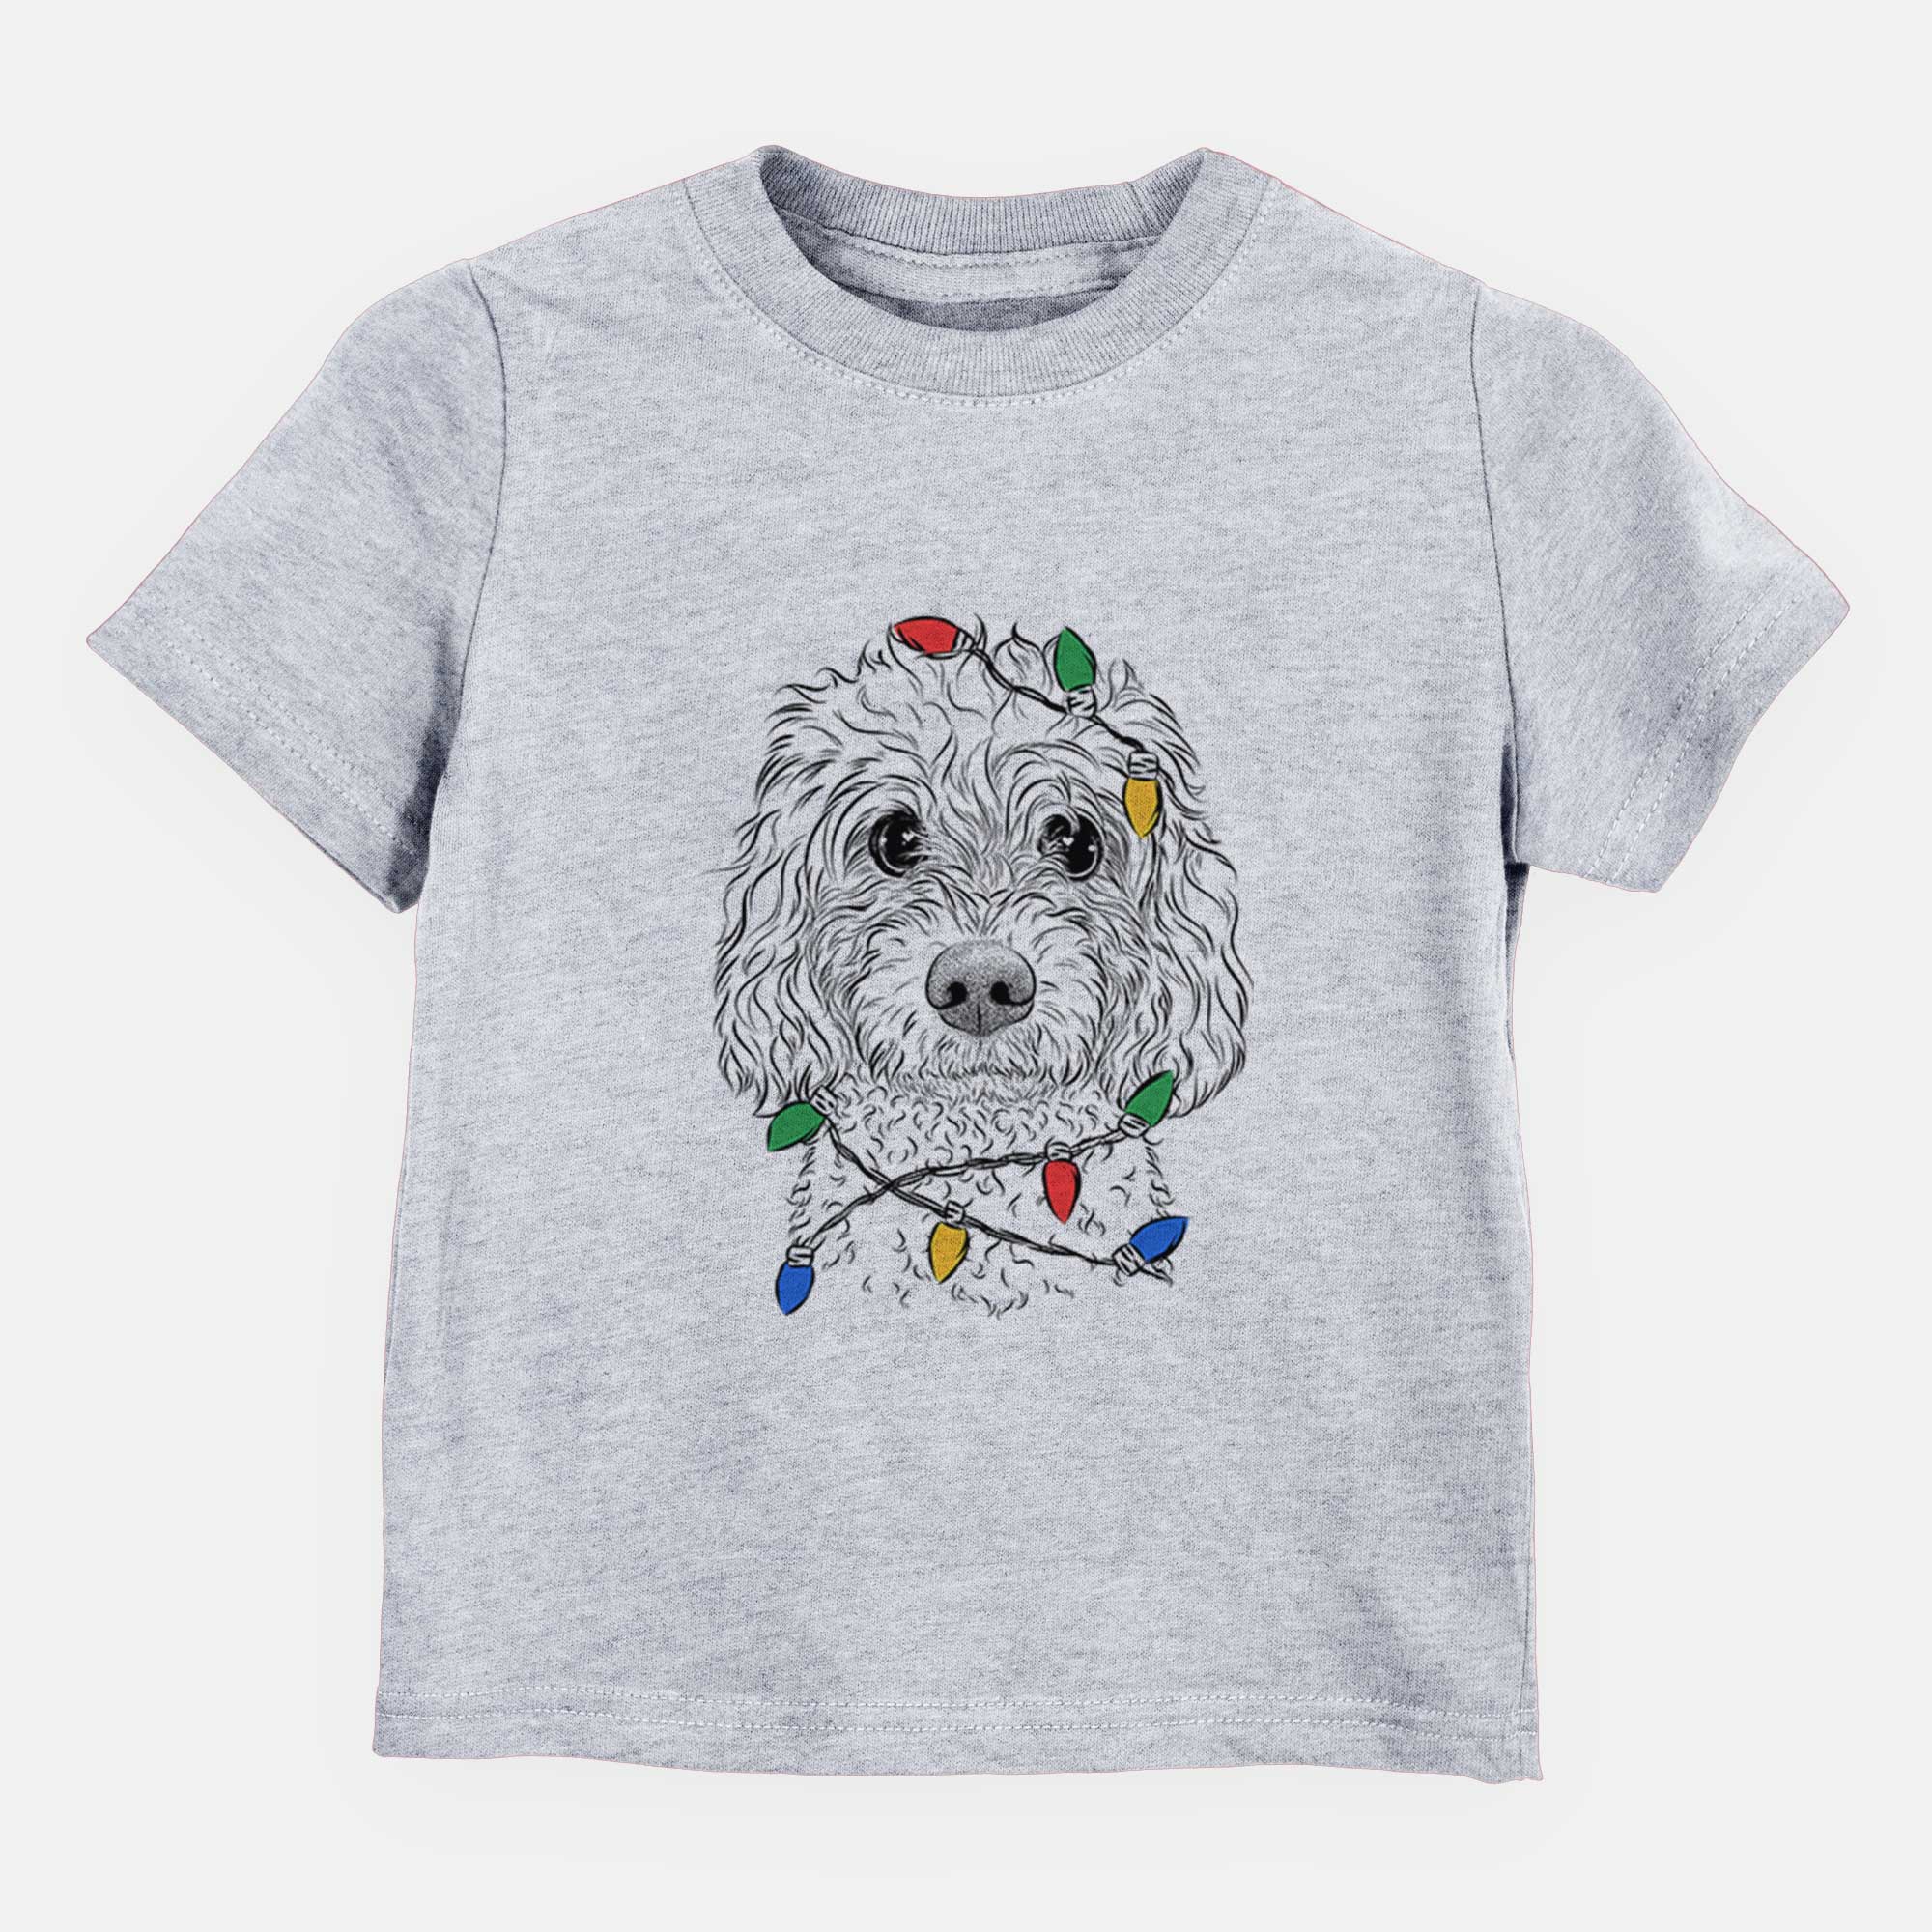 Christmas Lights Izzie the Cavachon - Kids/Youth/Toddler Shirt